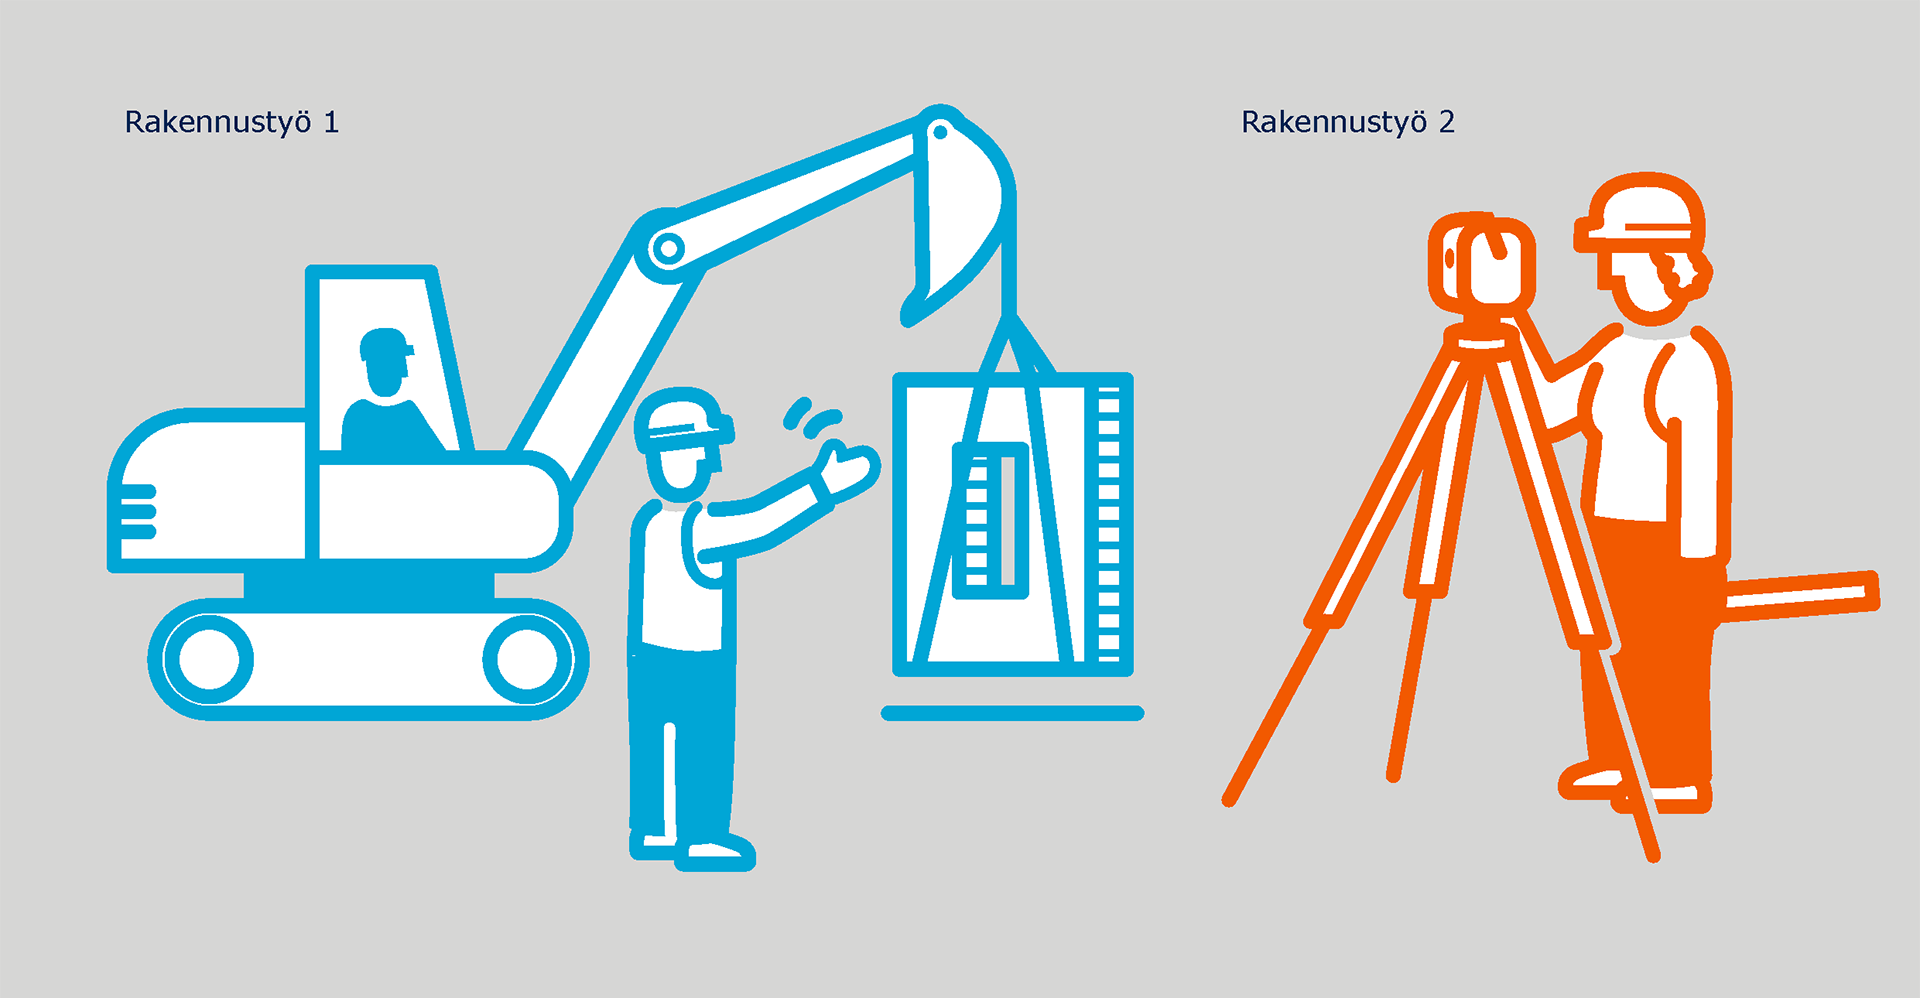 Two examples of pictograms related to construction sites.